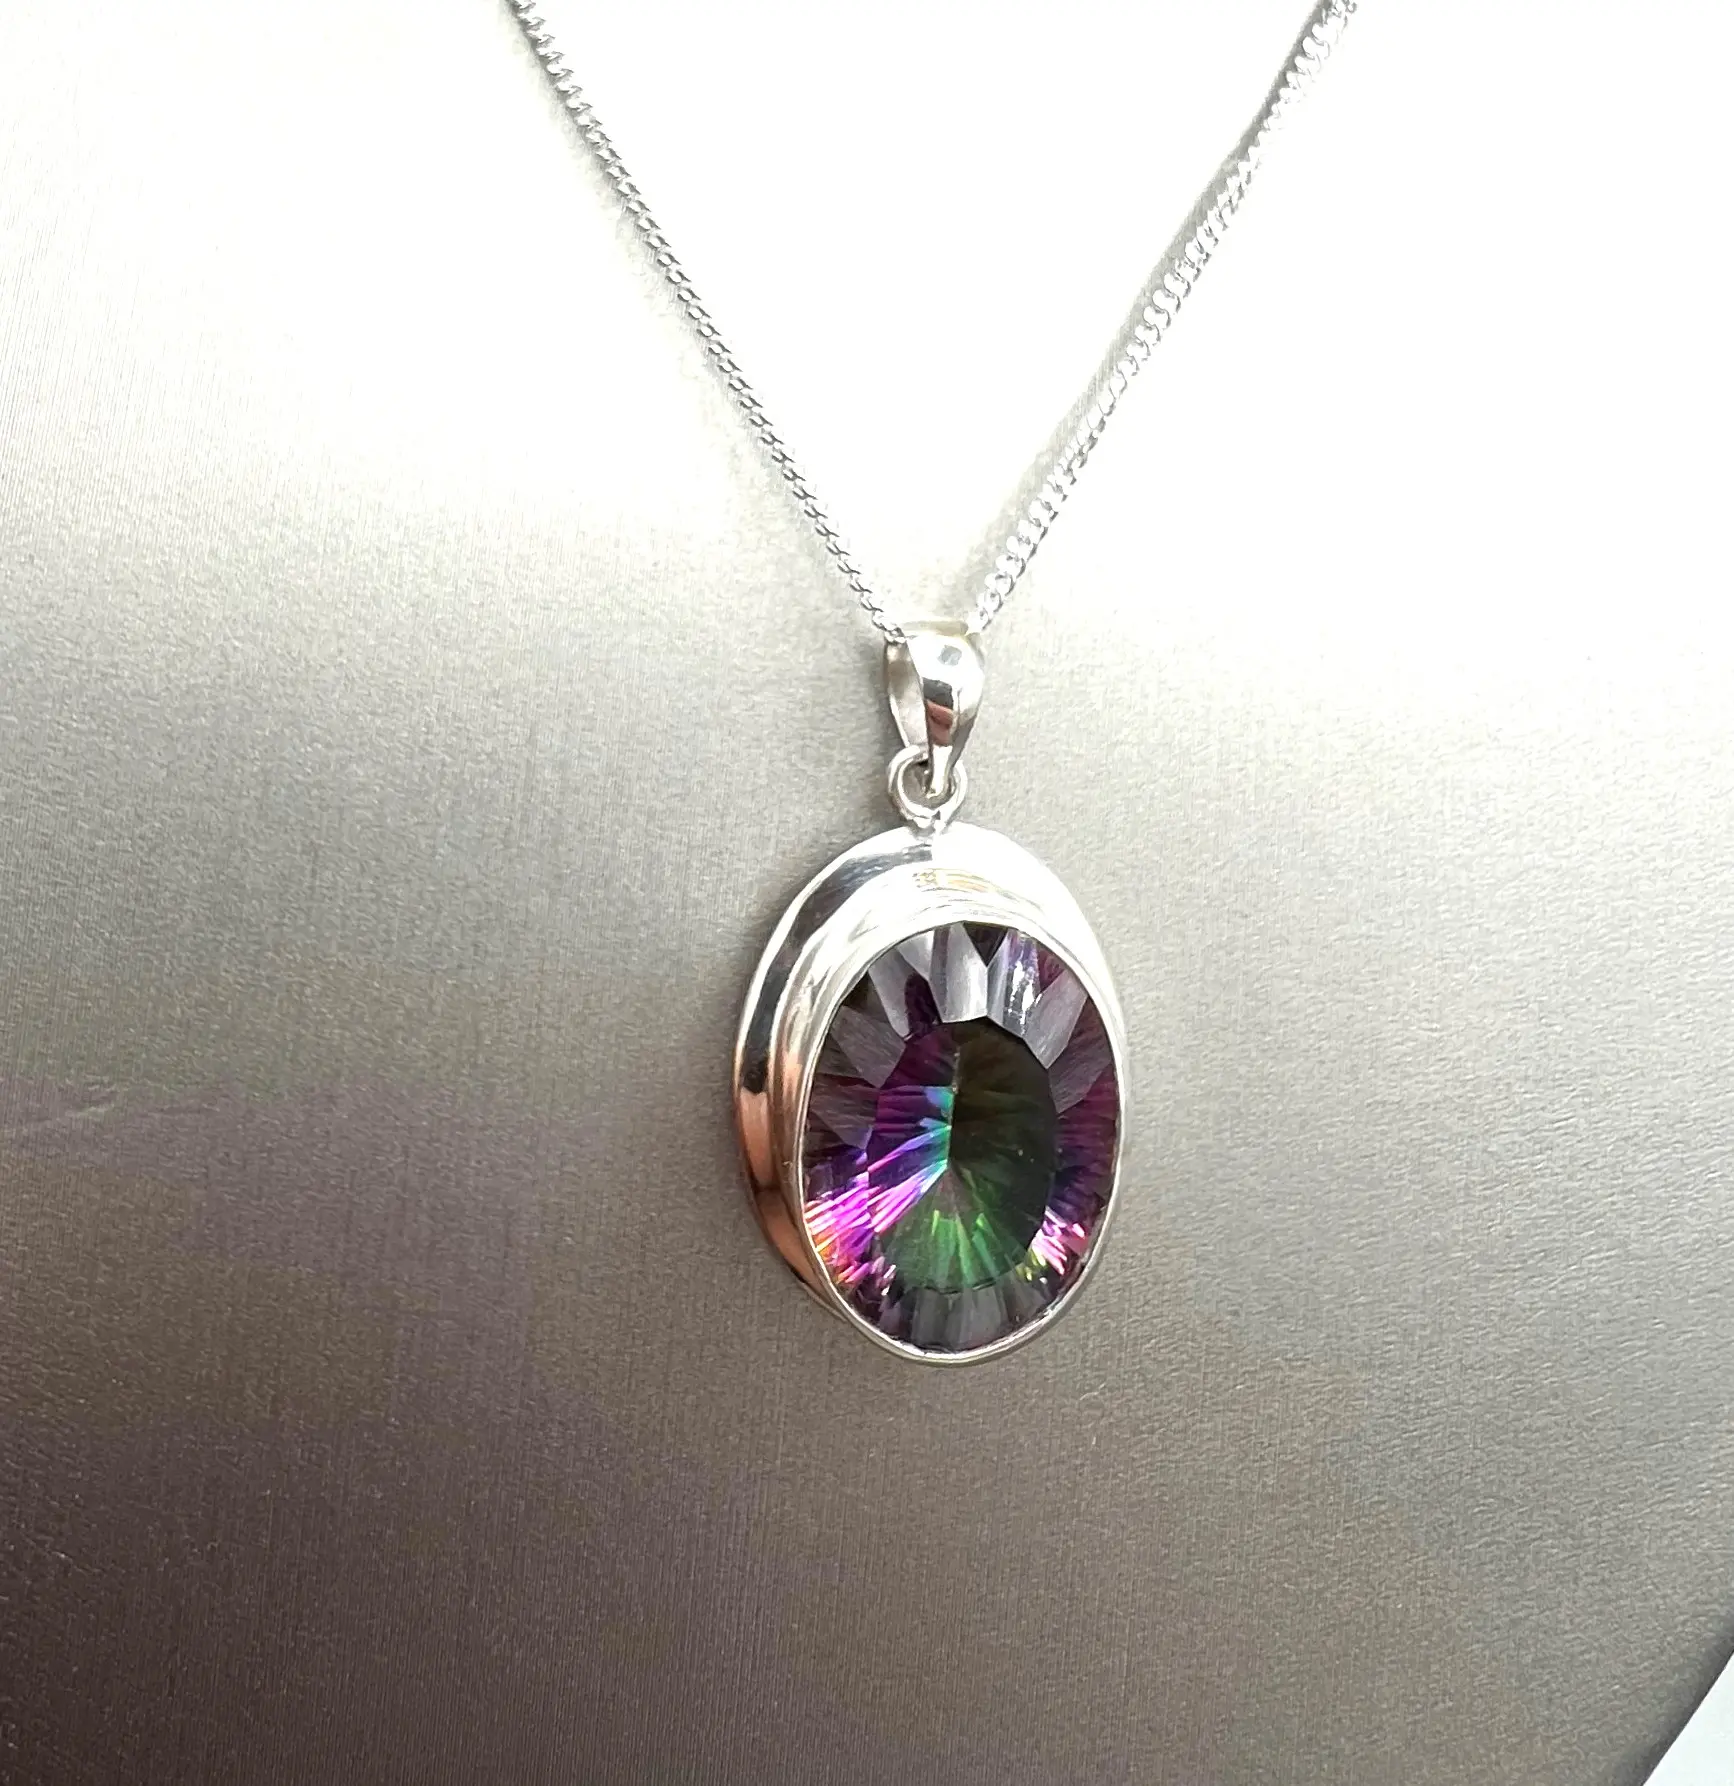 Silver Mystic Topaz Pendant Necklace With Gemstone, Sewar Silver Mystic Topaz Pendant Necklace With Gemstone